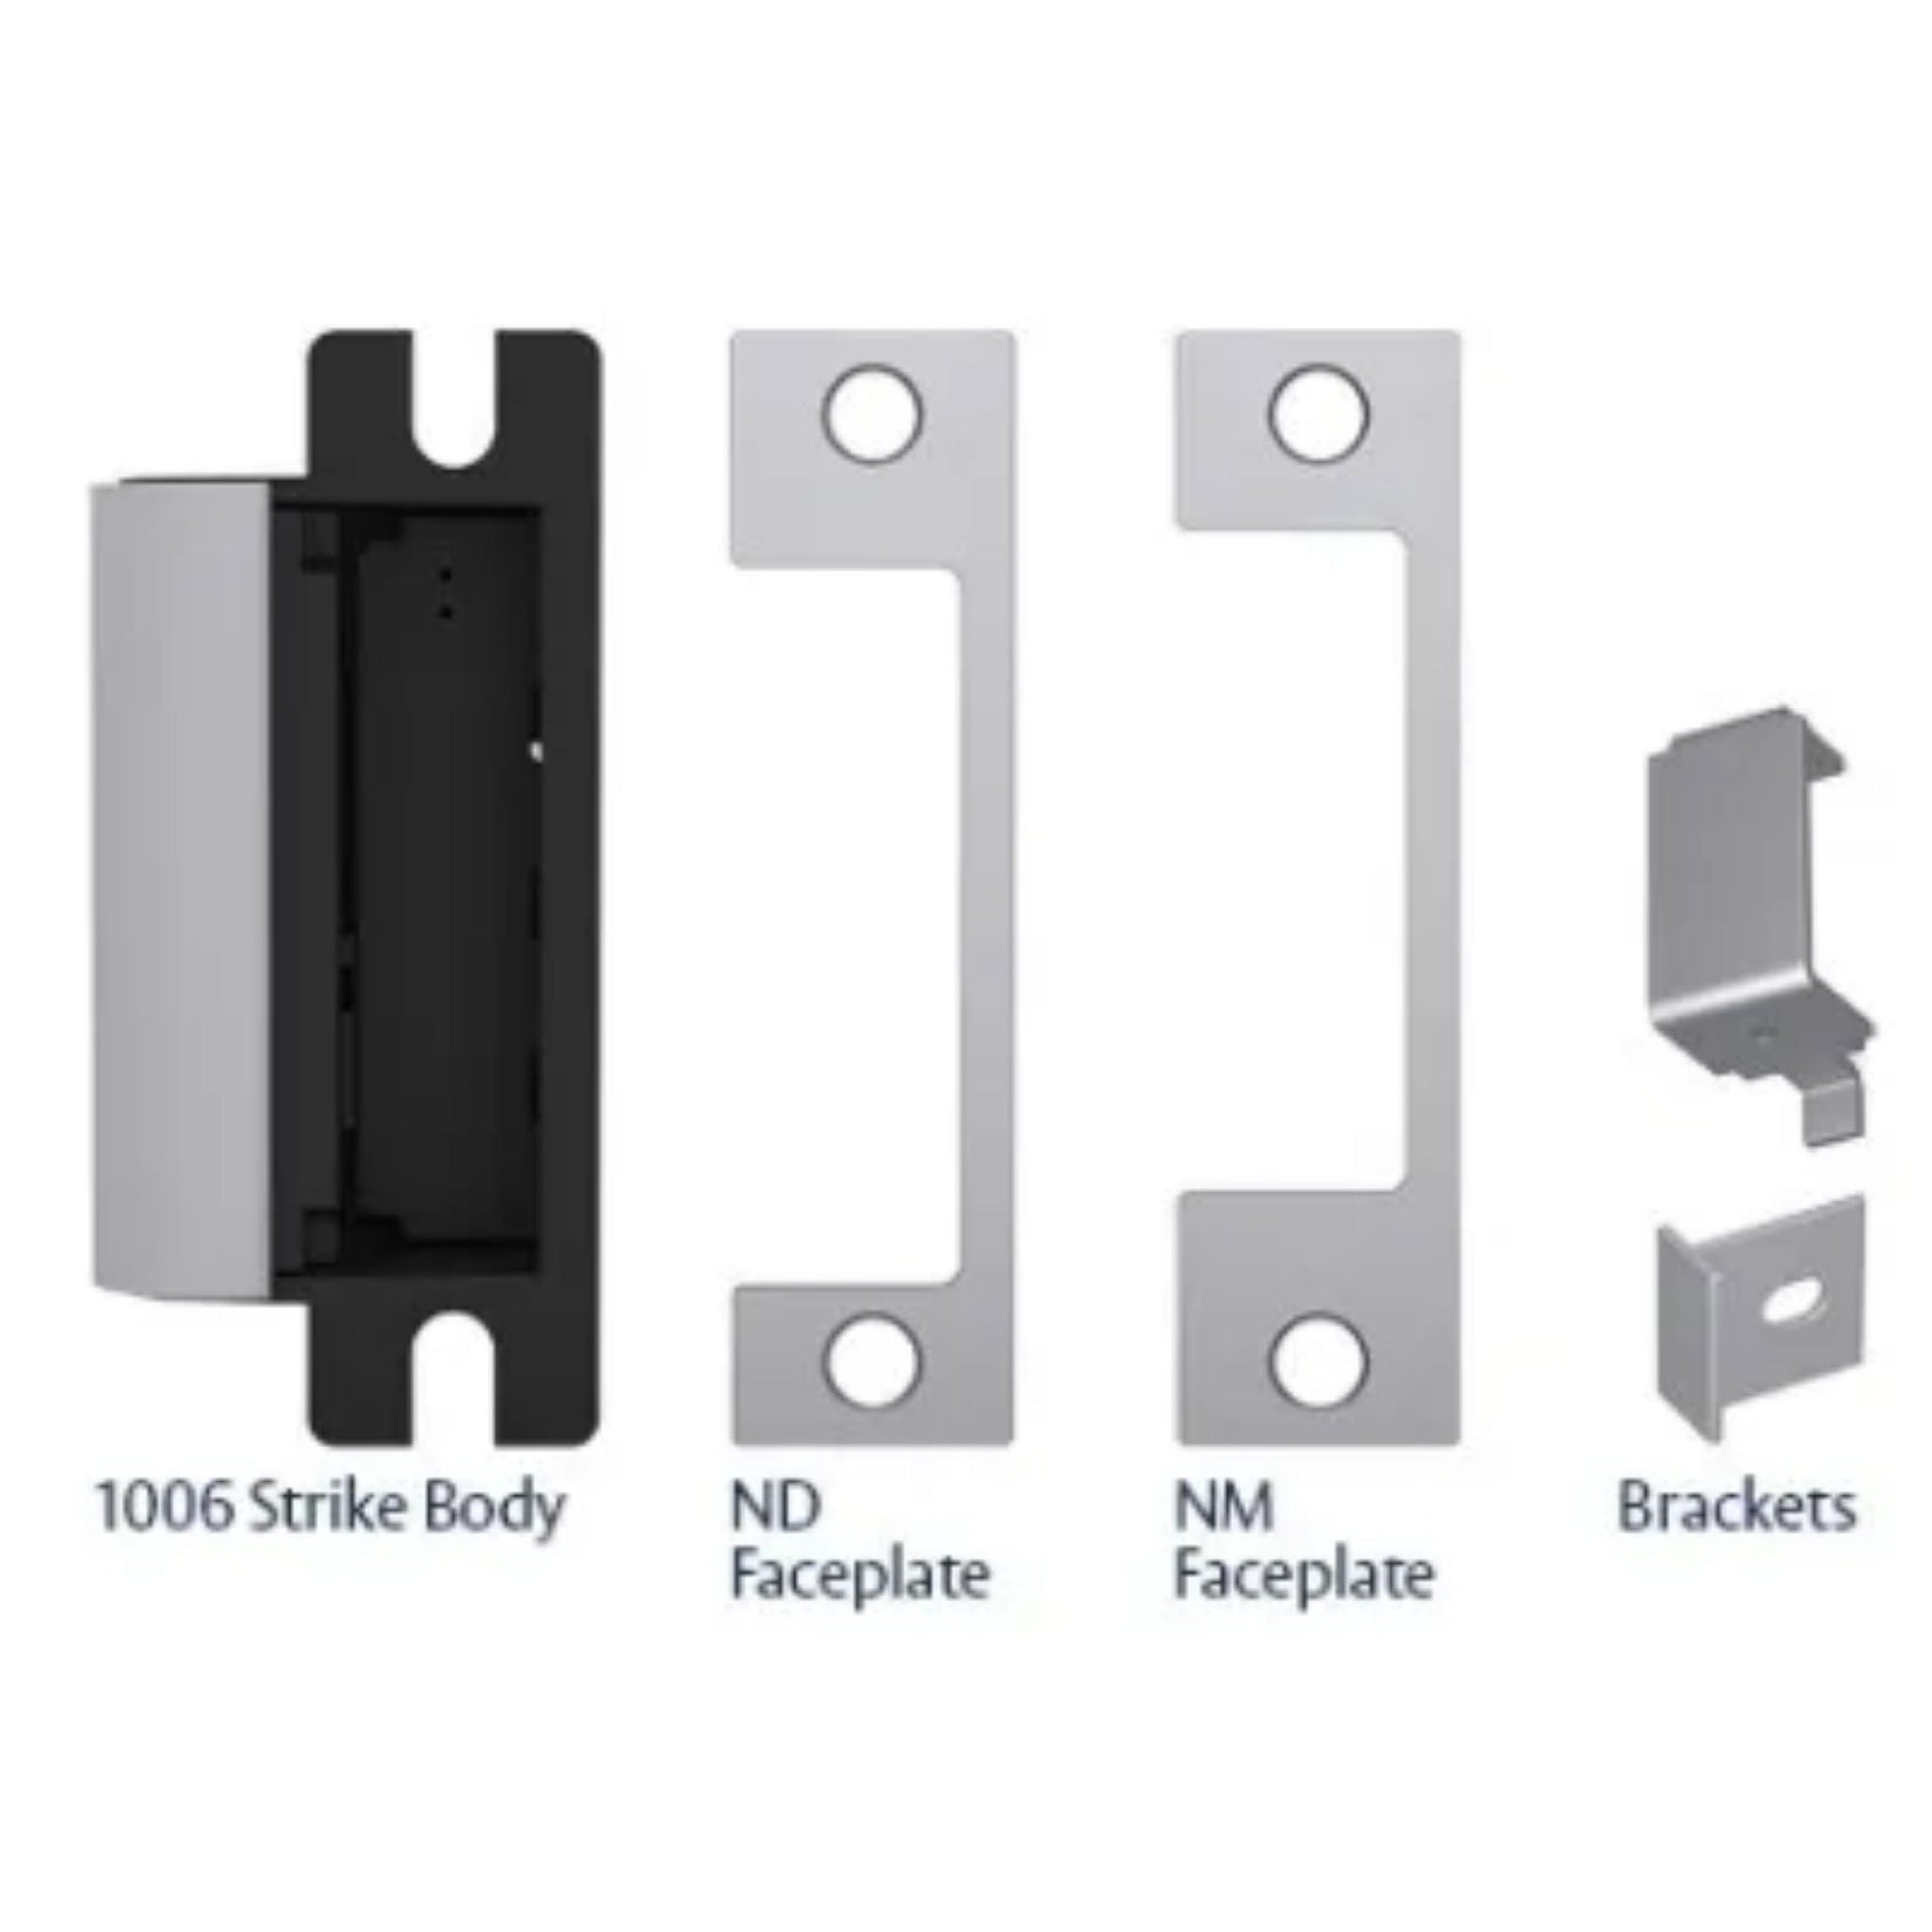 HES 1006CDB 630 Complete Pac Electric Strike Includes 1006 Strike Body, 2 Faceplates (ND-Option & NM-Option) and All Mounting Hardware Satin Stainless Steel Electric Strikes Fail Secure or Fail Safe Strikes - The Lock Source